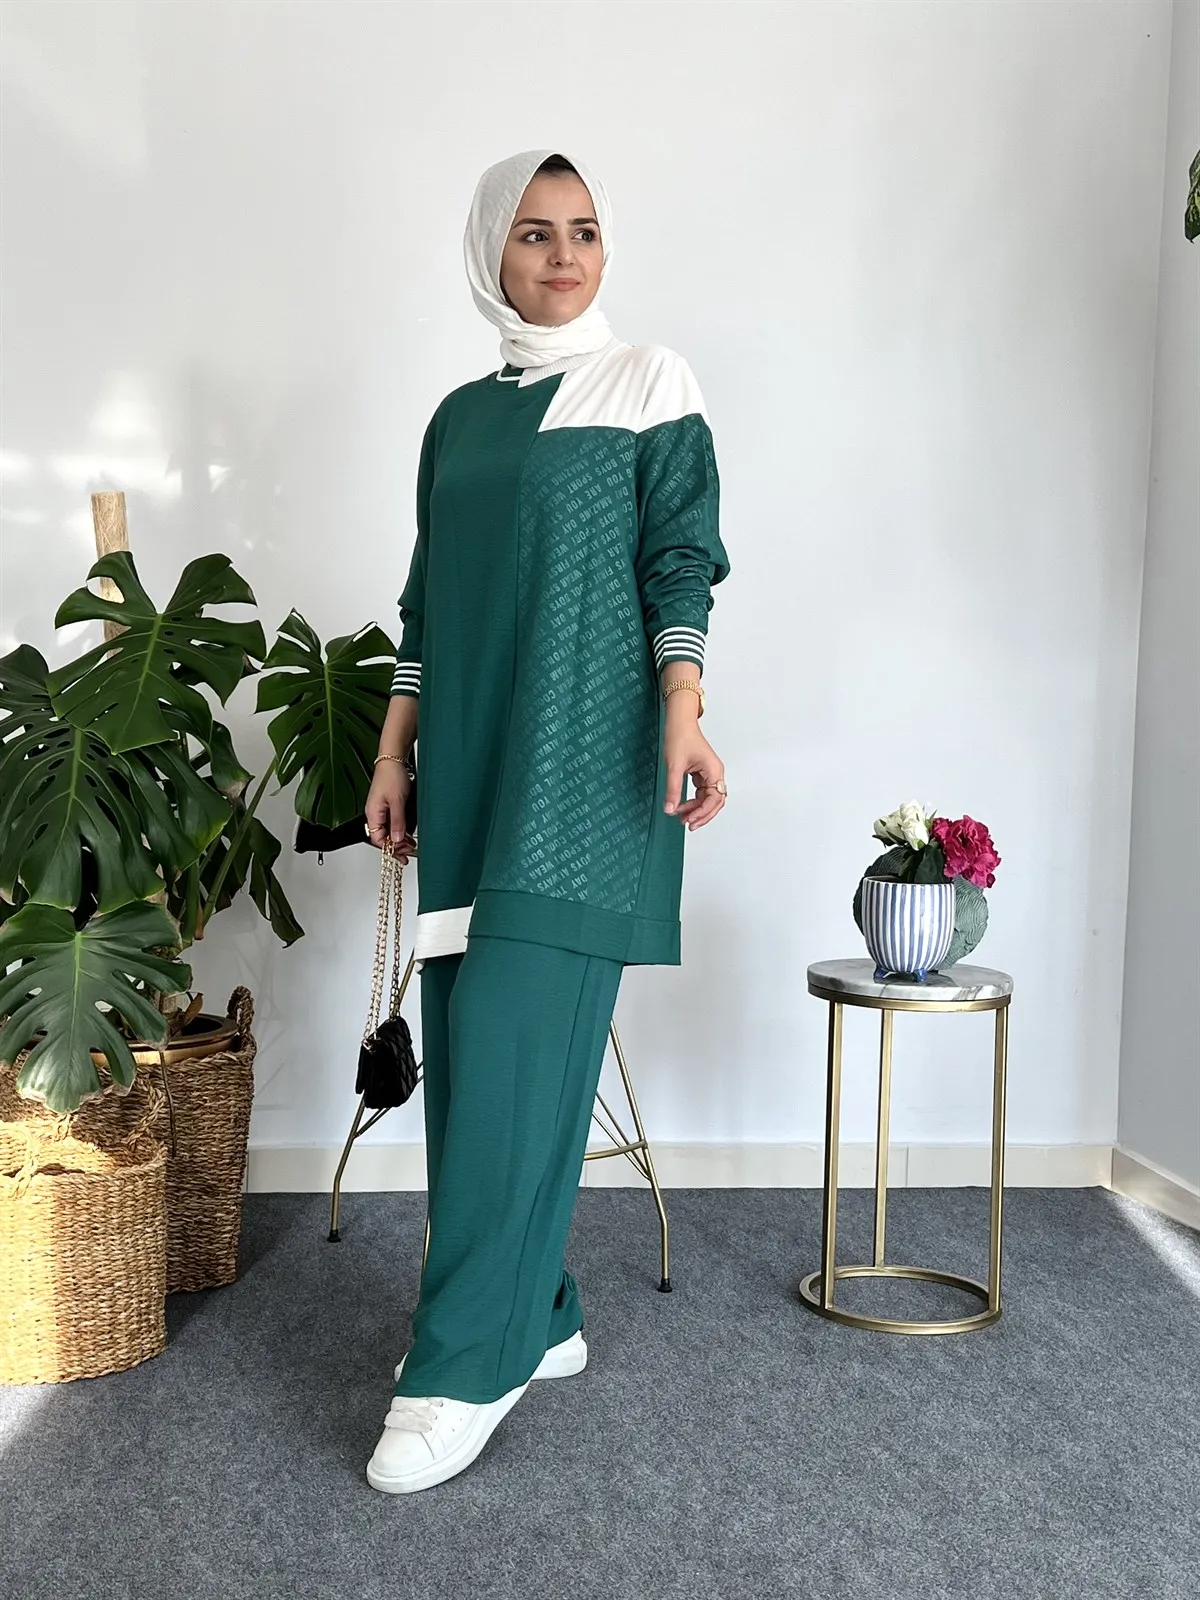 

Women's twinset tunic and trousers temporary shed yazlık suit women hijab suit Muslim fashion elegant and stylish casual use